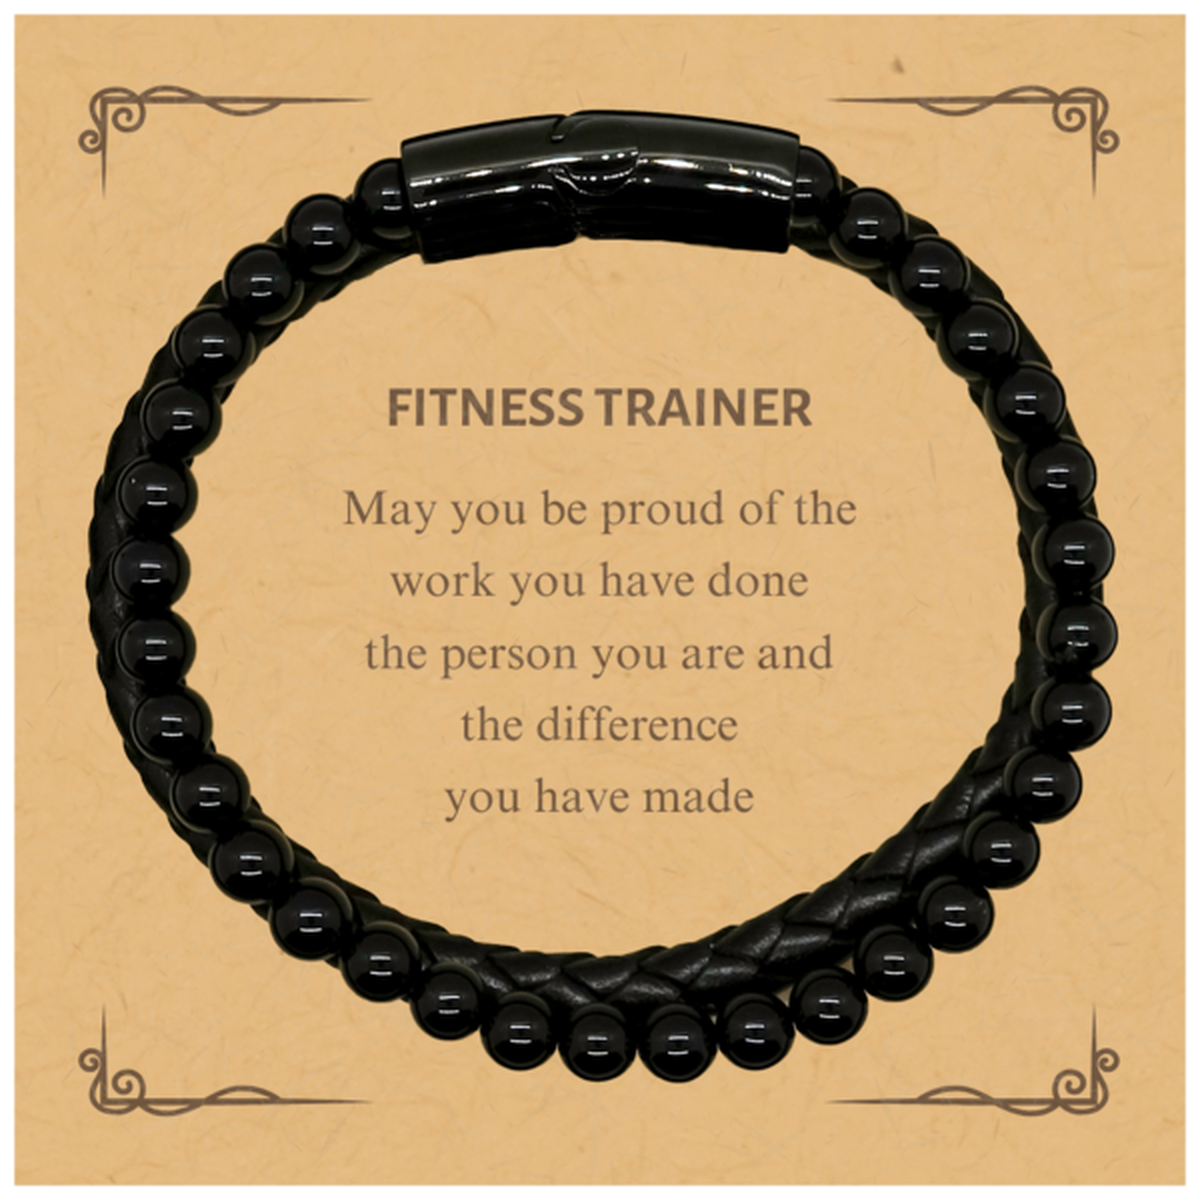 Fitness Trainer May you be proud of the work you have done, Retirement Fitness Trainer Stone Leather Bracelets for Colleague Appreciation Gifts Amazing for Fitness Trainer